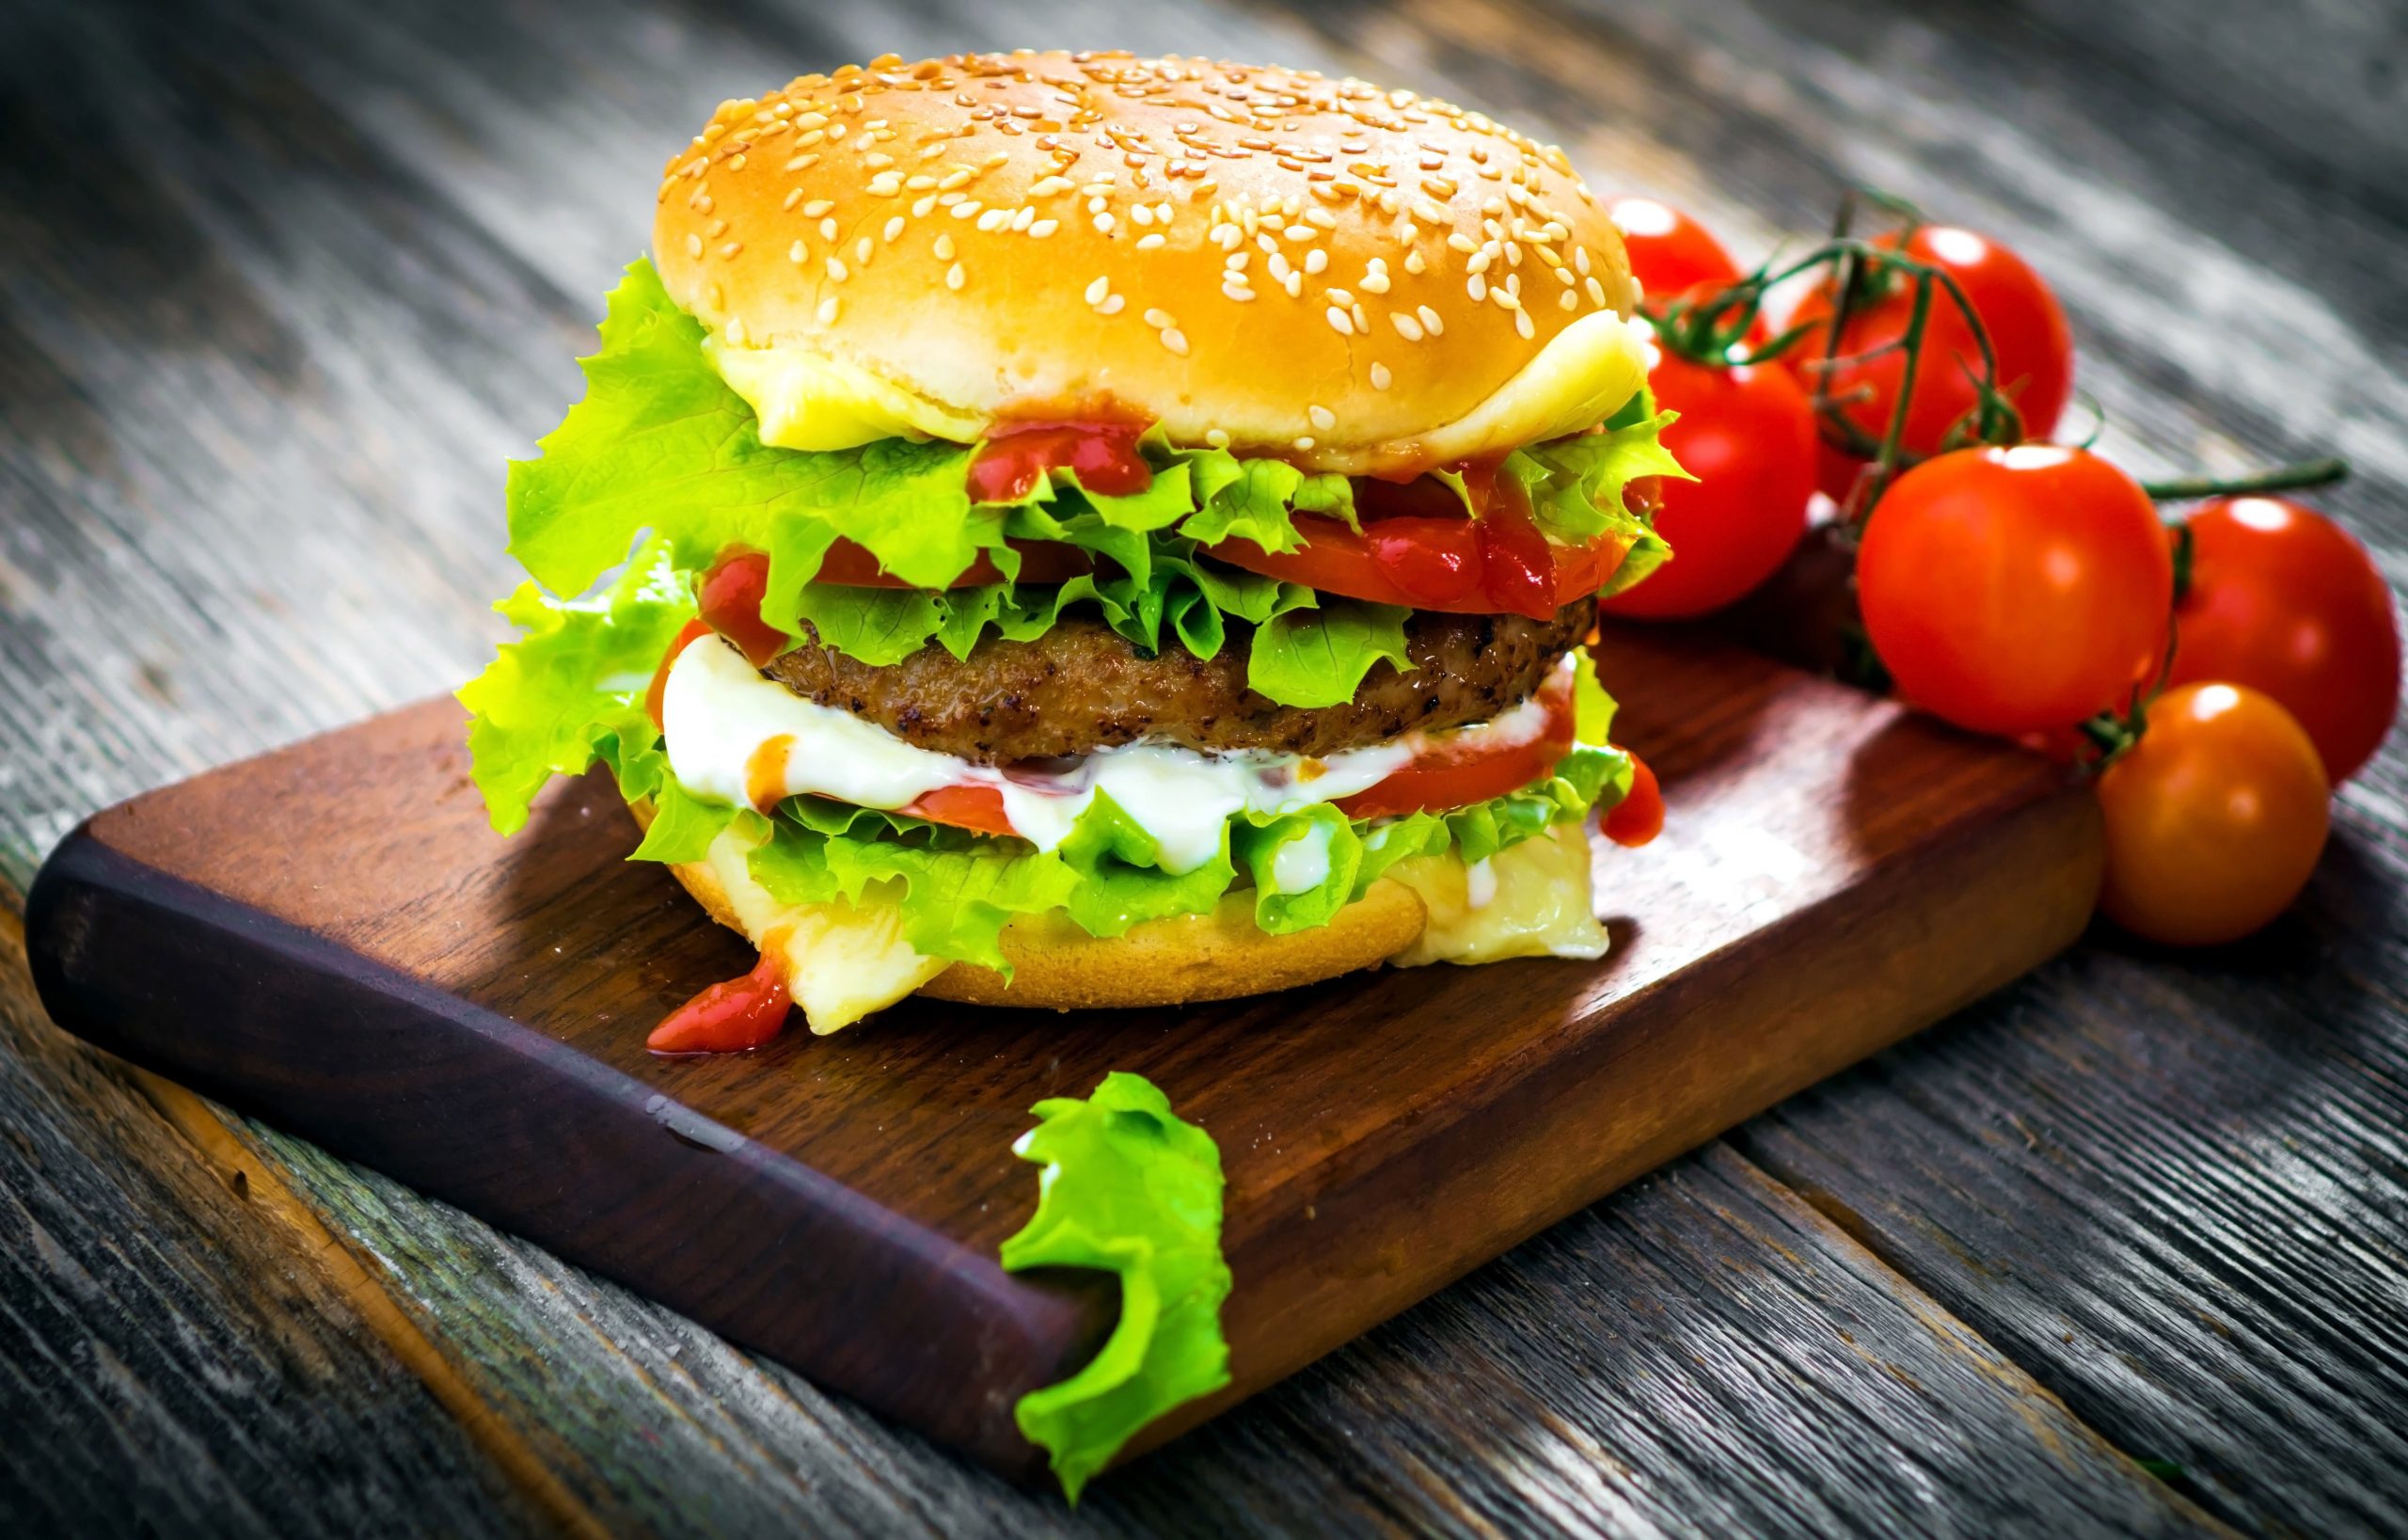 Burger with meat and tomatoes wallpaper, hamburgers, fast food, fruit, food and drink